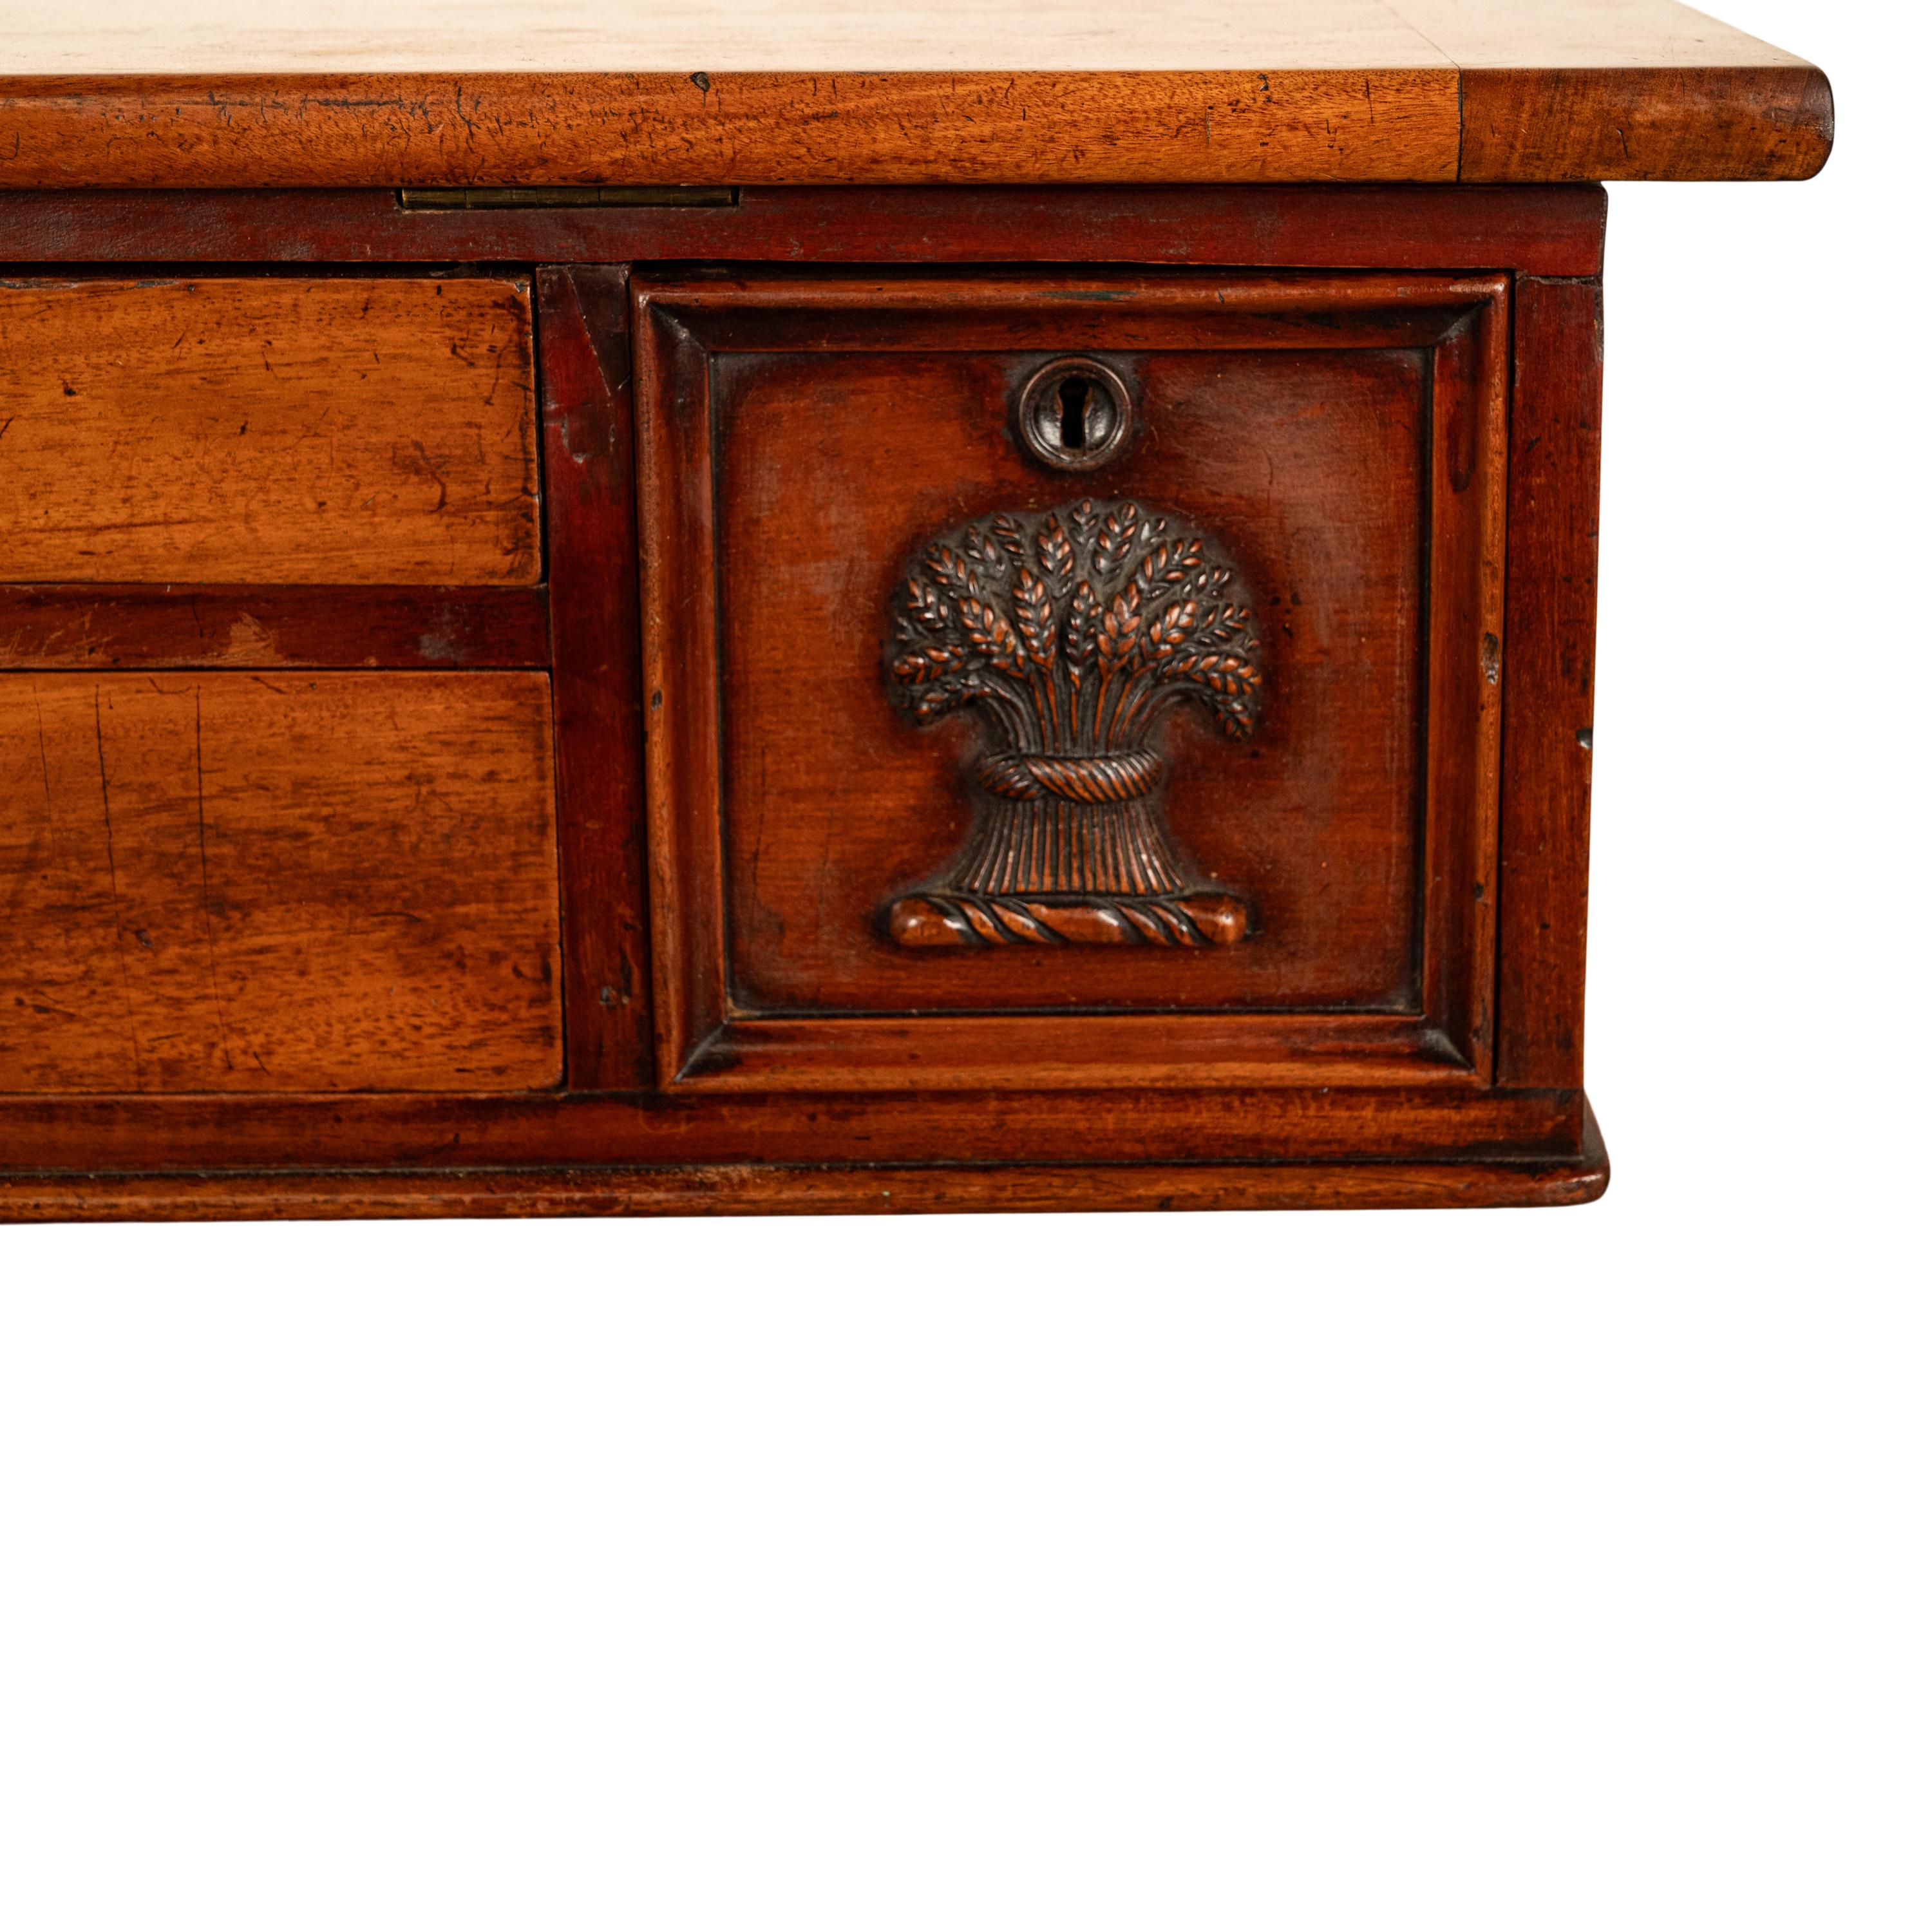 Antique 19th Century Architect's Mahogany Pedestal Desk Drafting Table 1870 For Sale 7